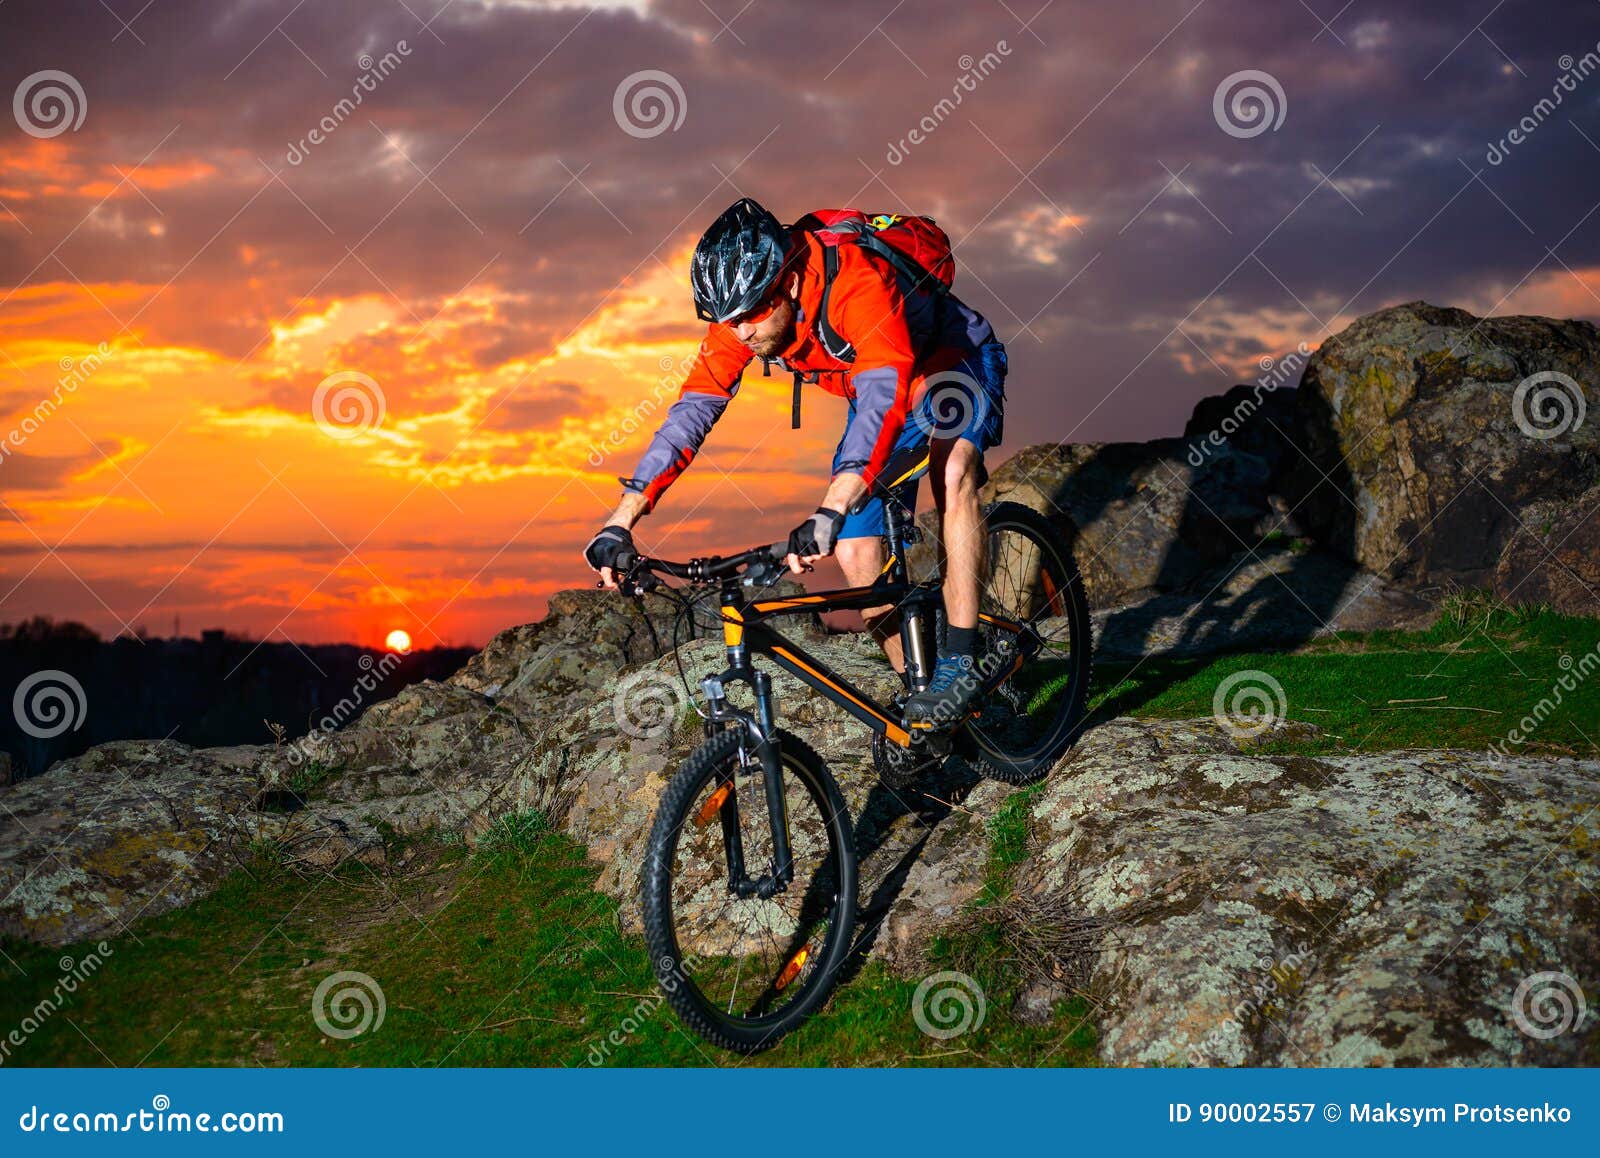 cyclist riding mountain bike down spring rocky hill at beautiful sunset. extreme sports and adventure concept.